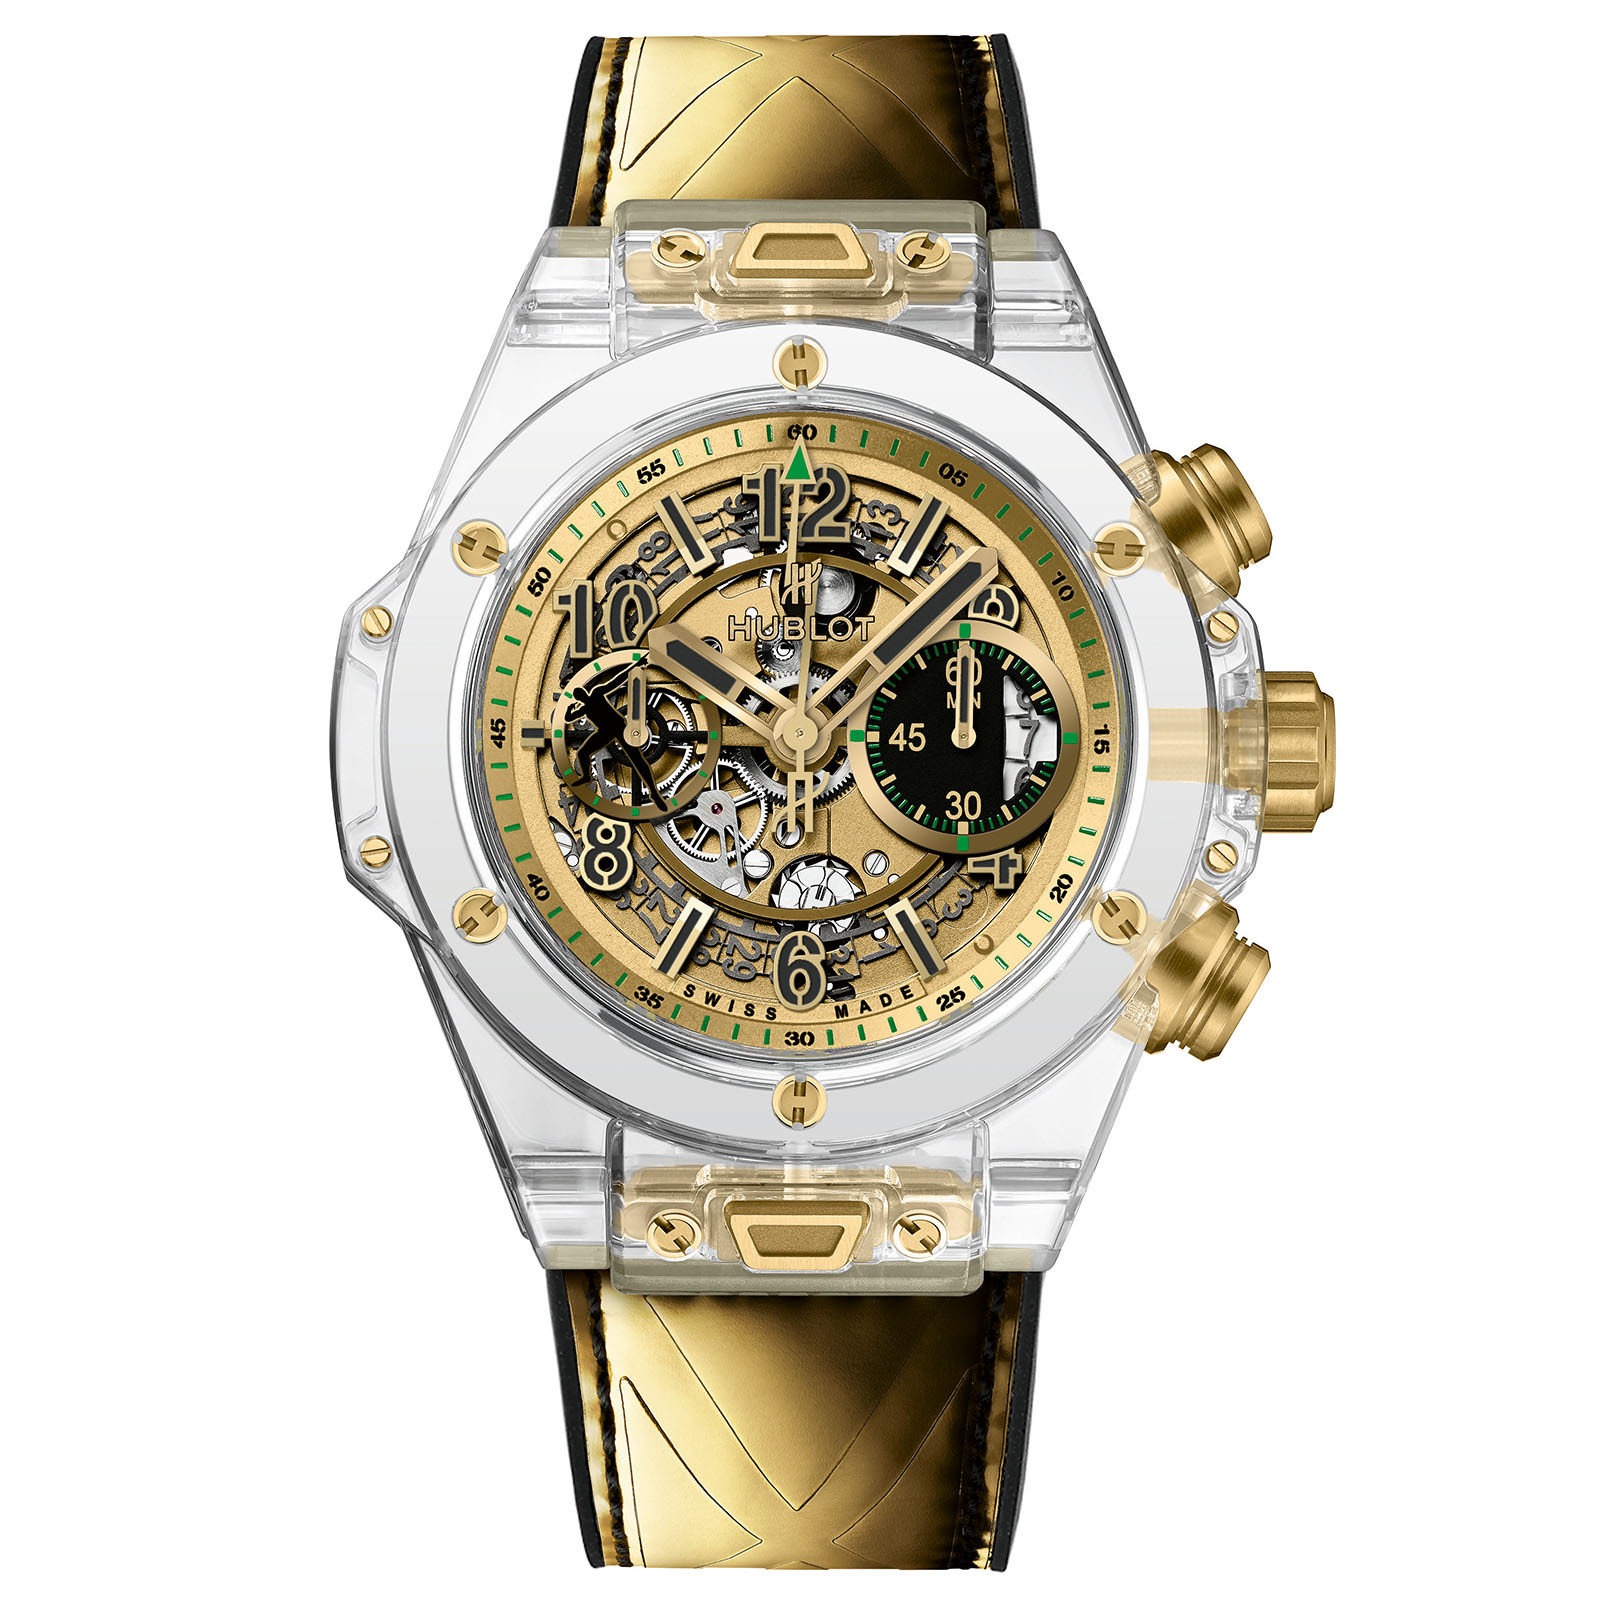 Big Bang Unico Sapphire Usain Bolt for Only Watch | Watchonista